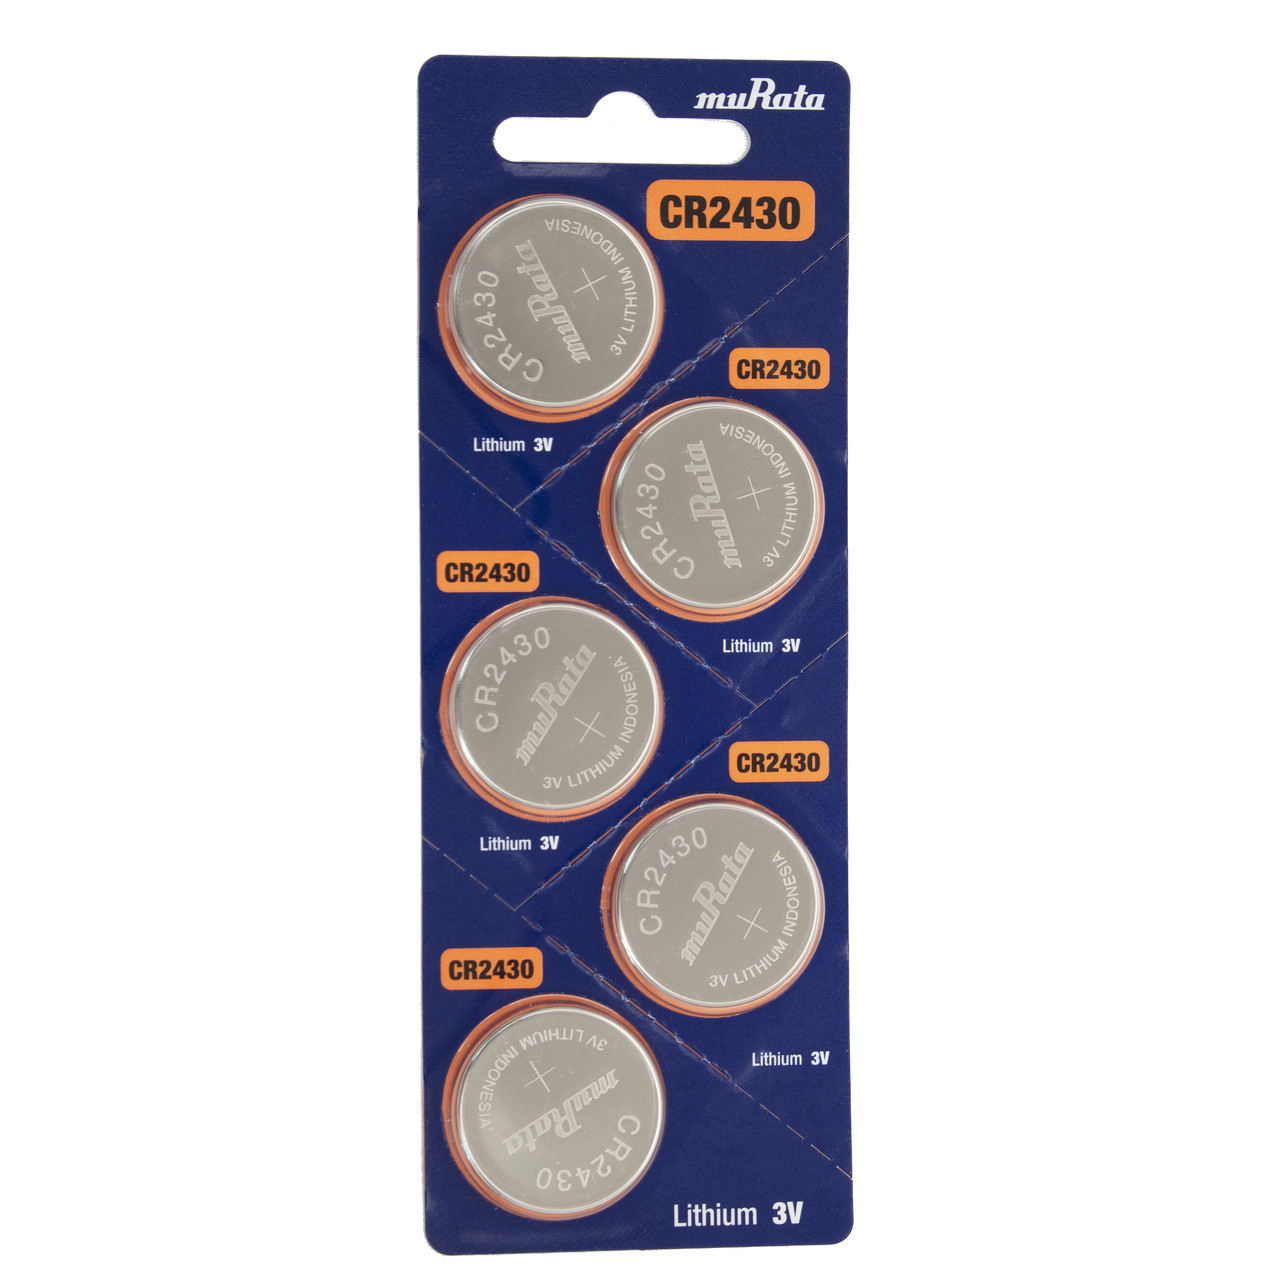 Sony Murata CR2430 3V Lithium Coin Battery - 5 Pack FREE SHIPPING